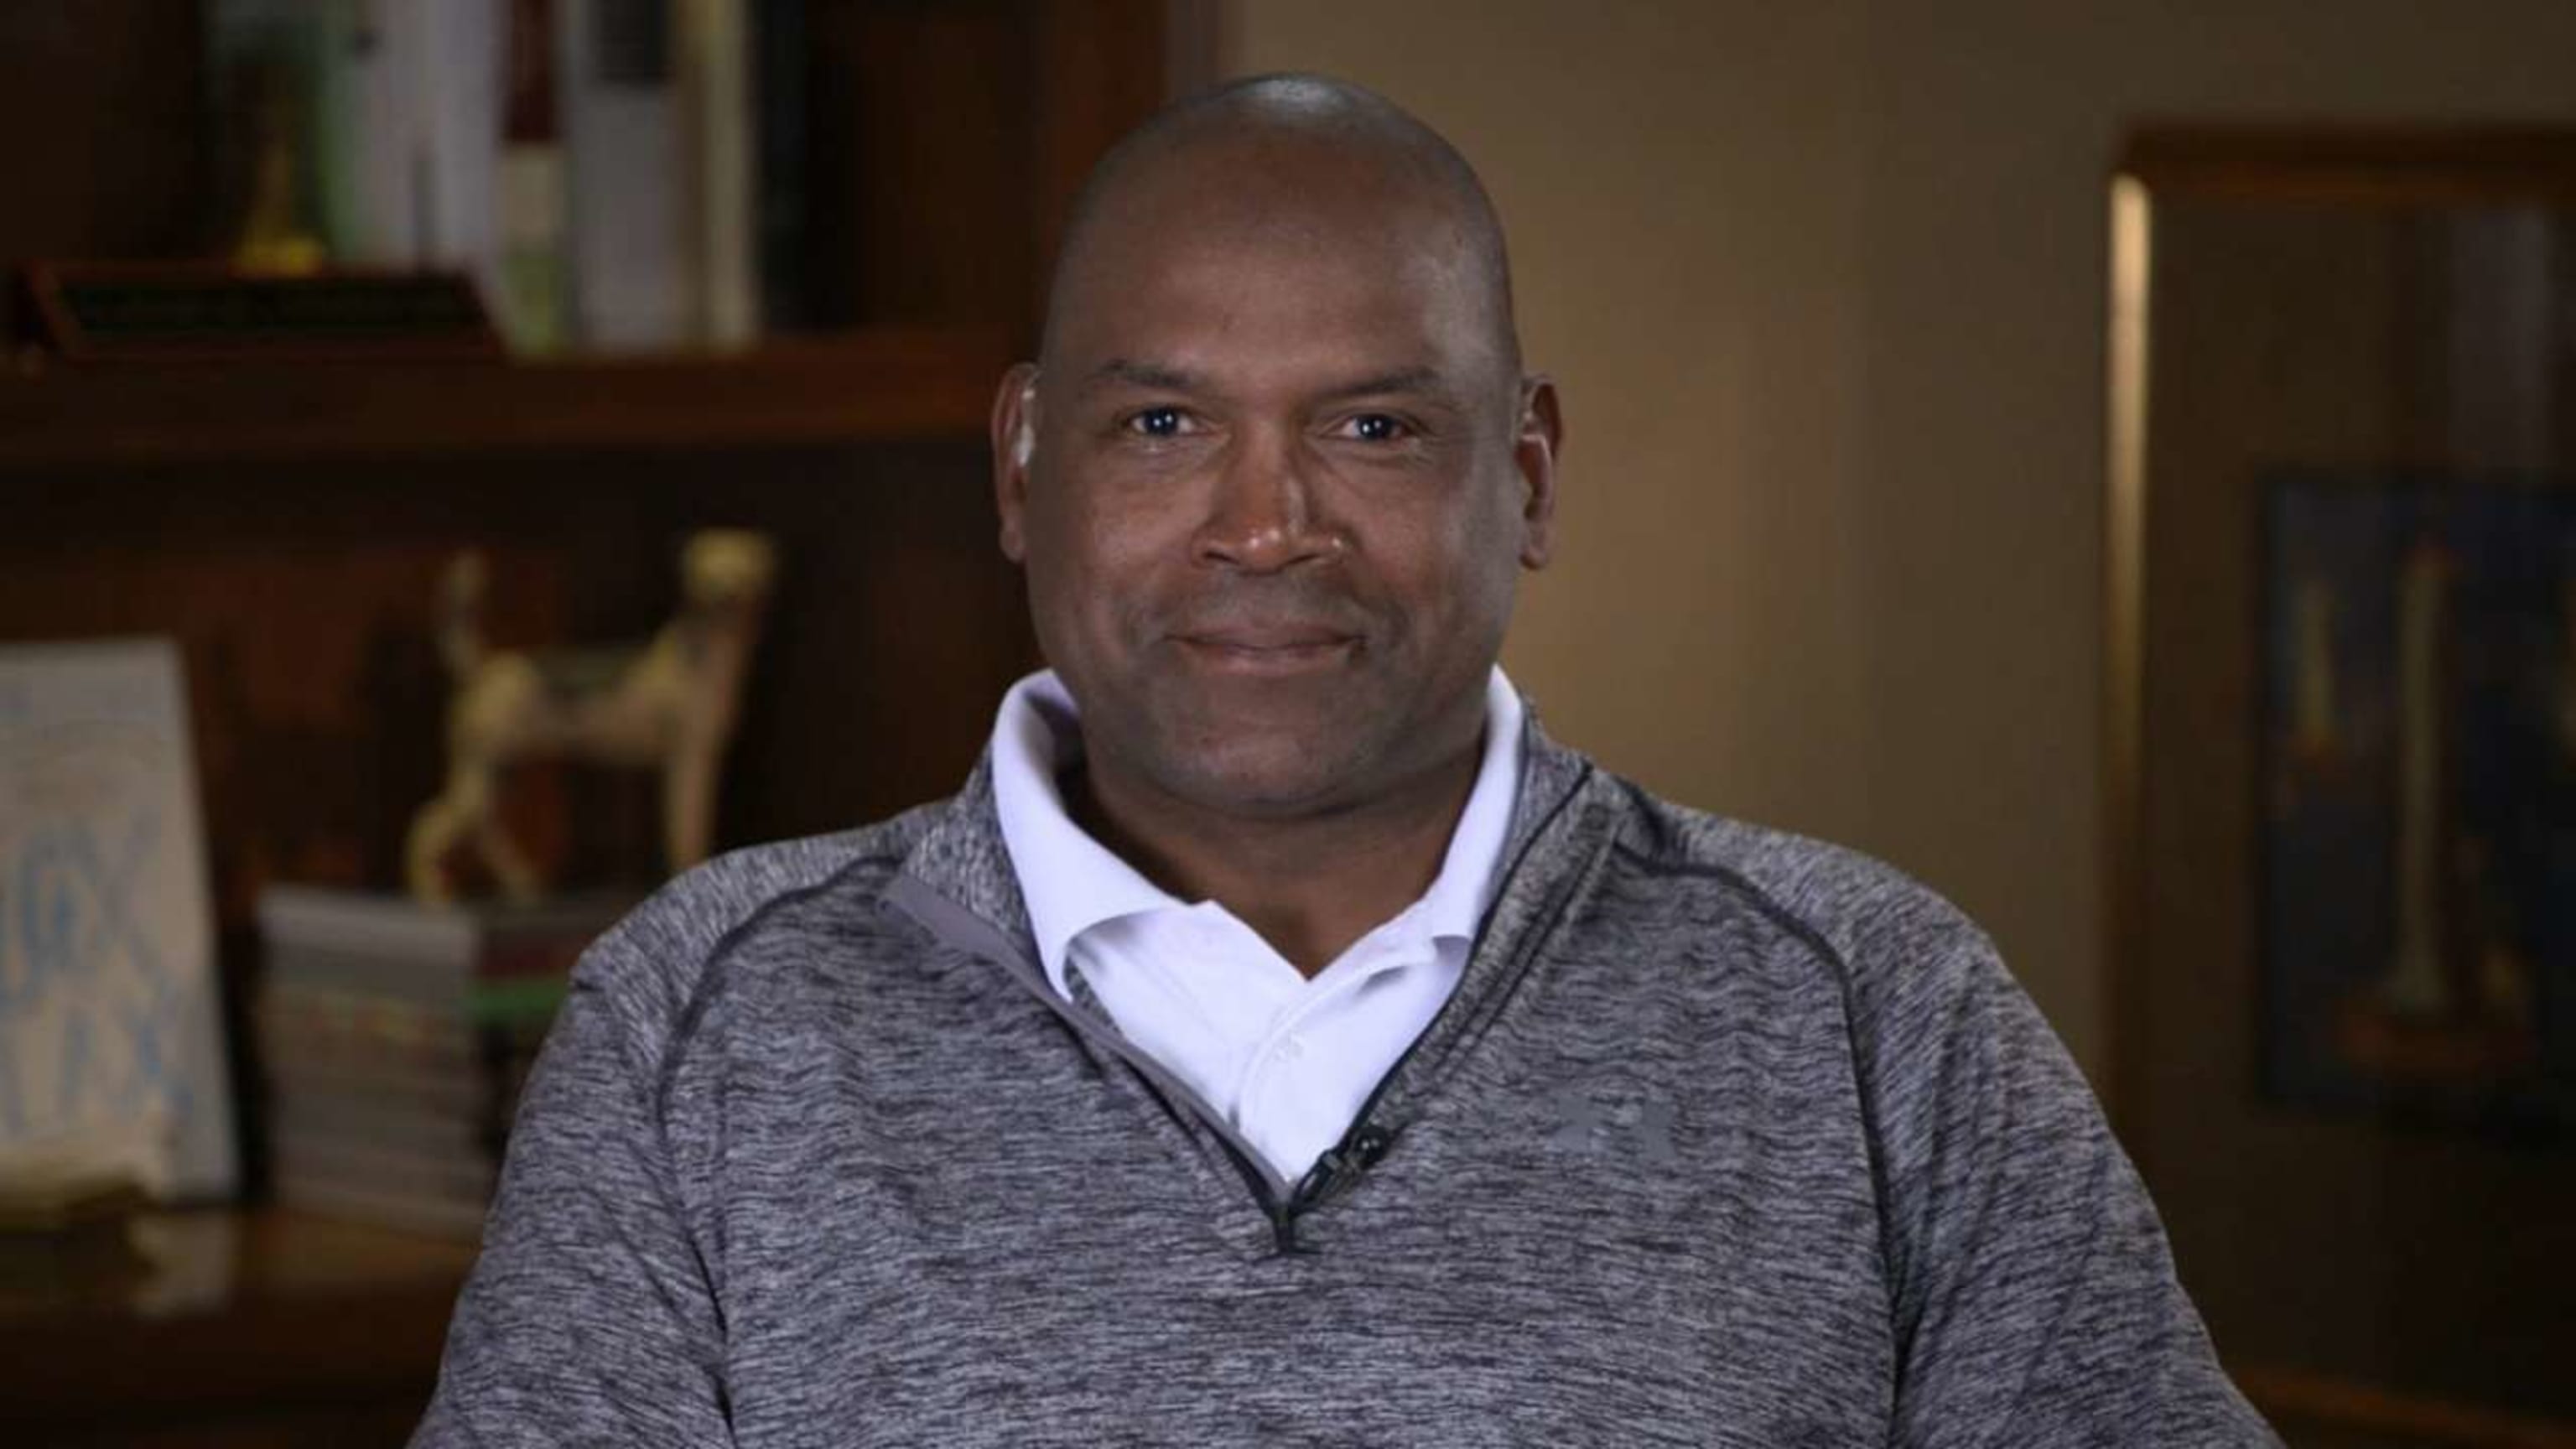 Tim Raines says he'll cheer for the Expos, er, Nationals in the World Series